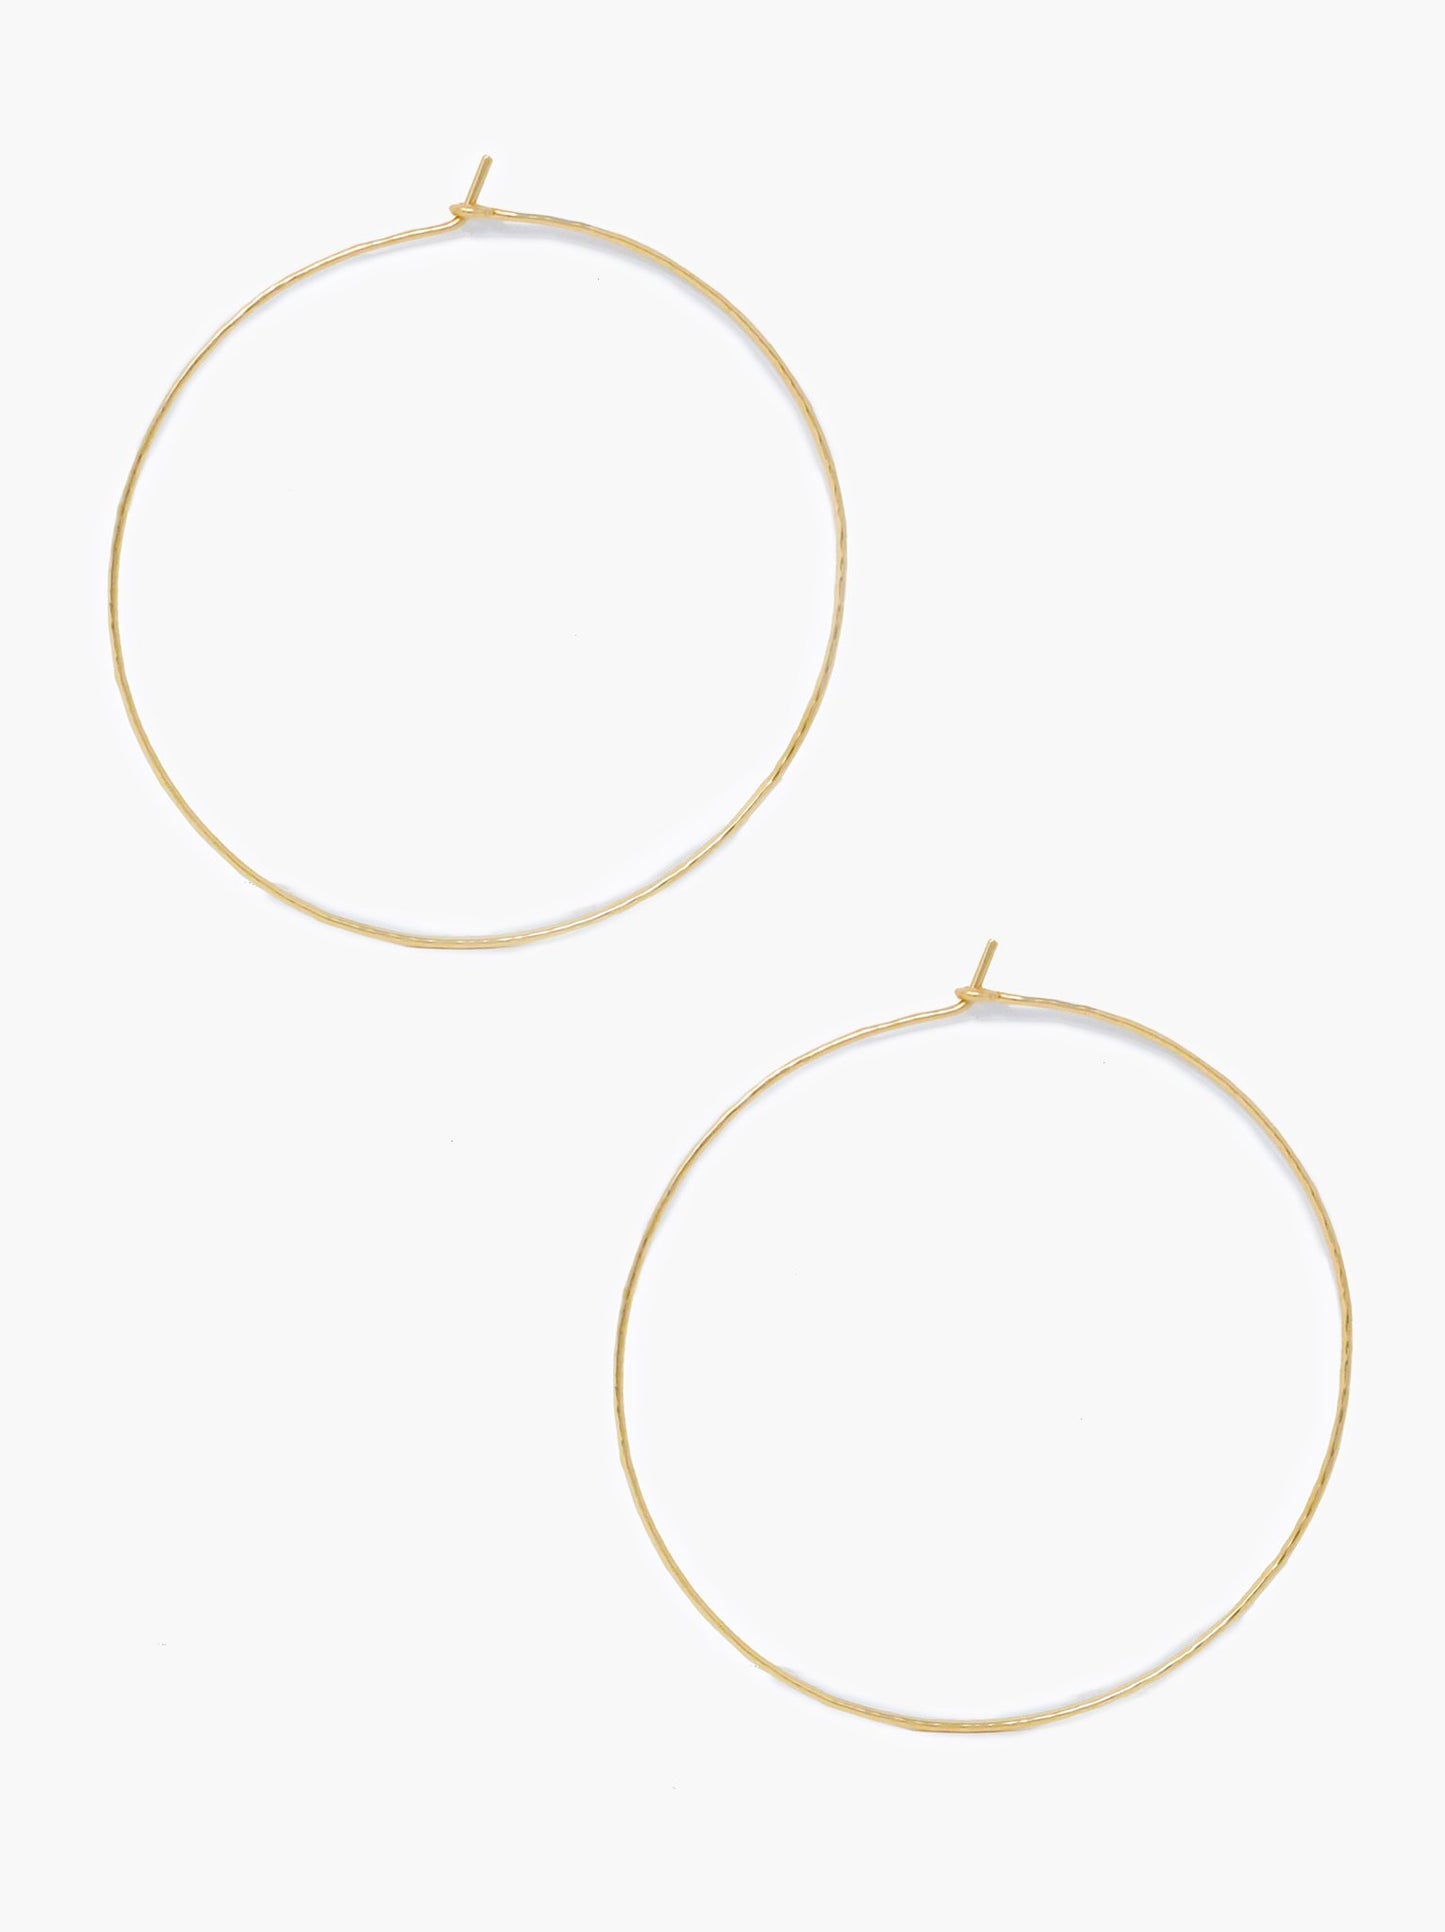 Able Luxe 2.5" Gold Hoop Earrings in  at Wrapsody